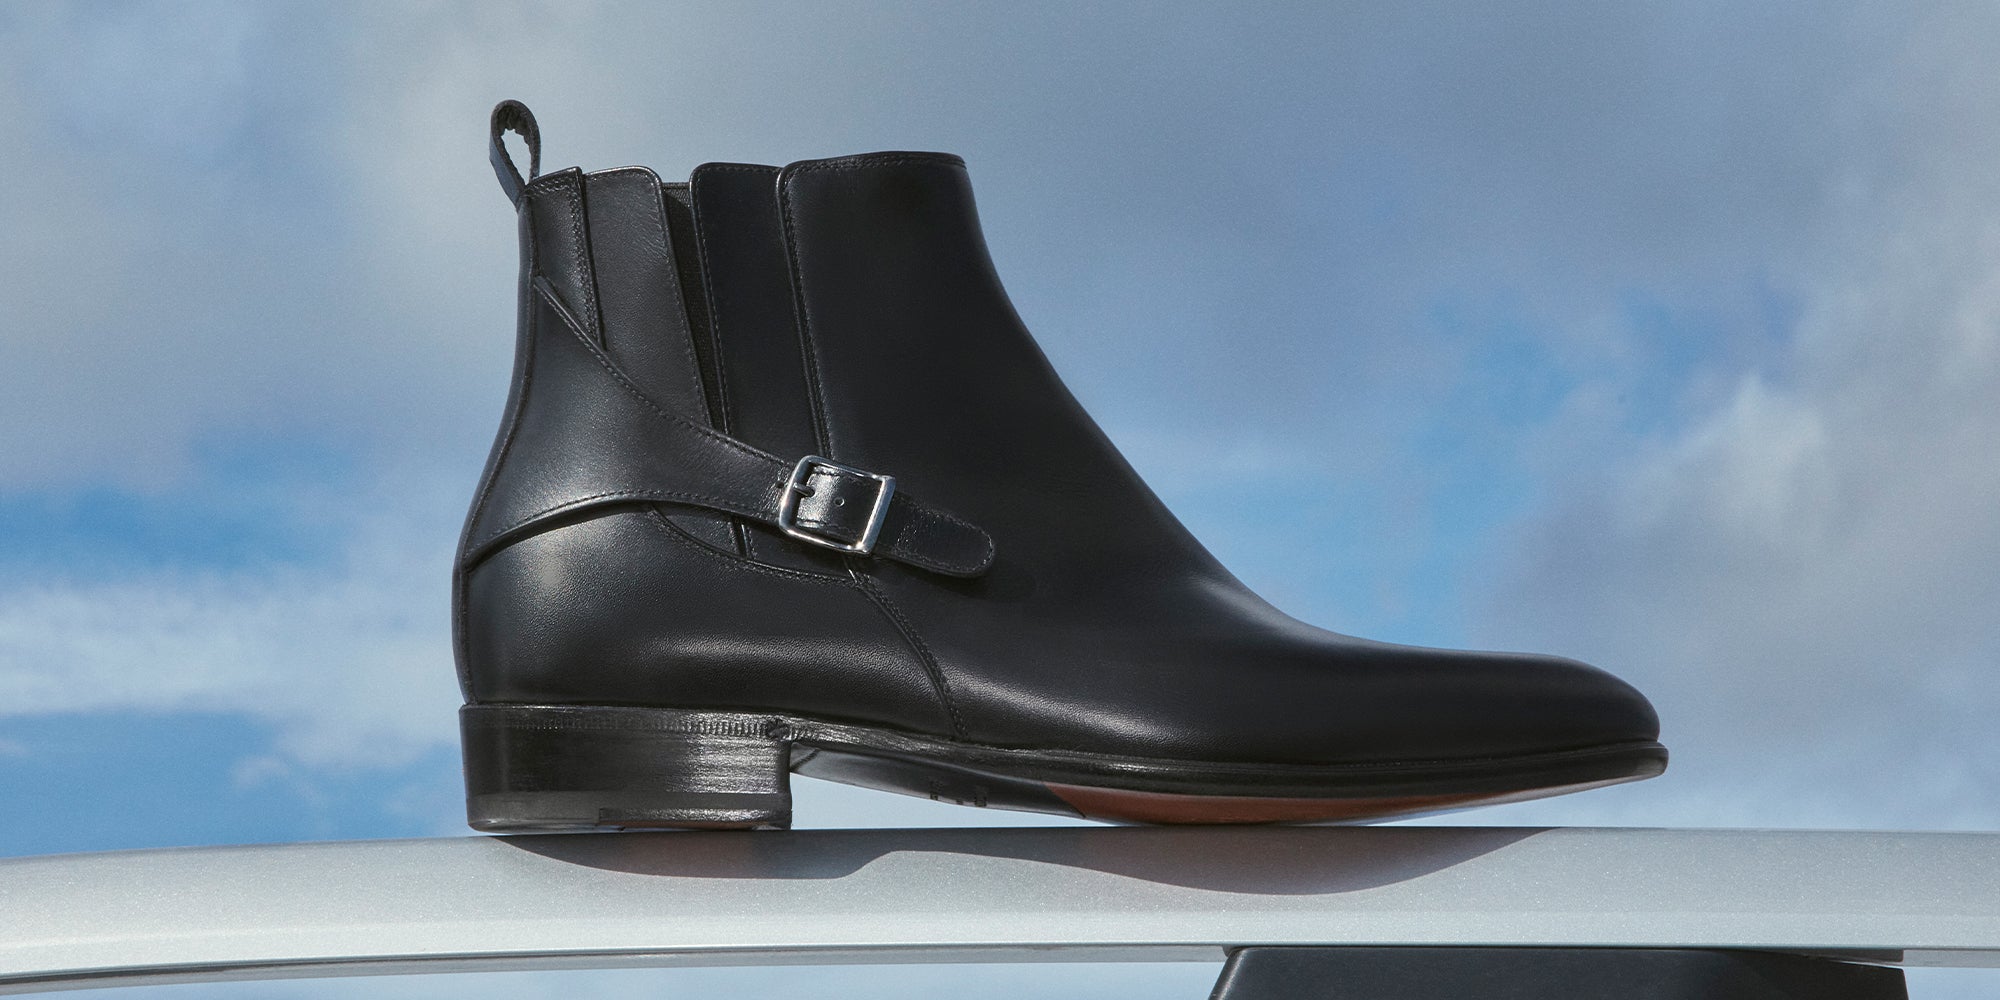 solopgang matrix Jeg spiser morgenmad Grand Boots - The Grand Boots Collection by Baudoin & Lange